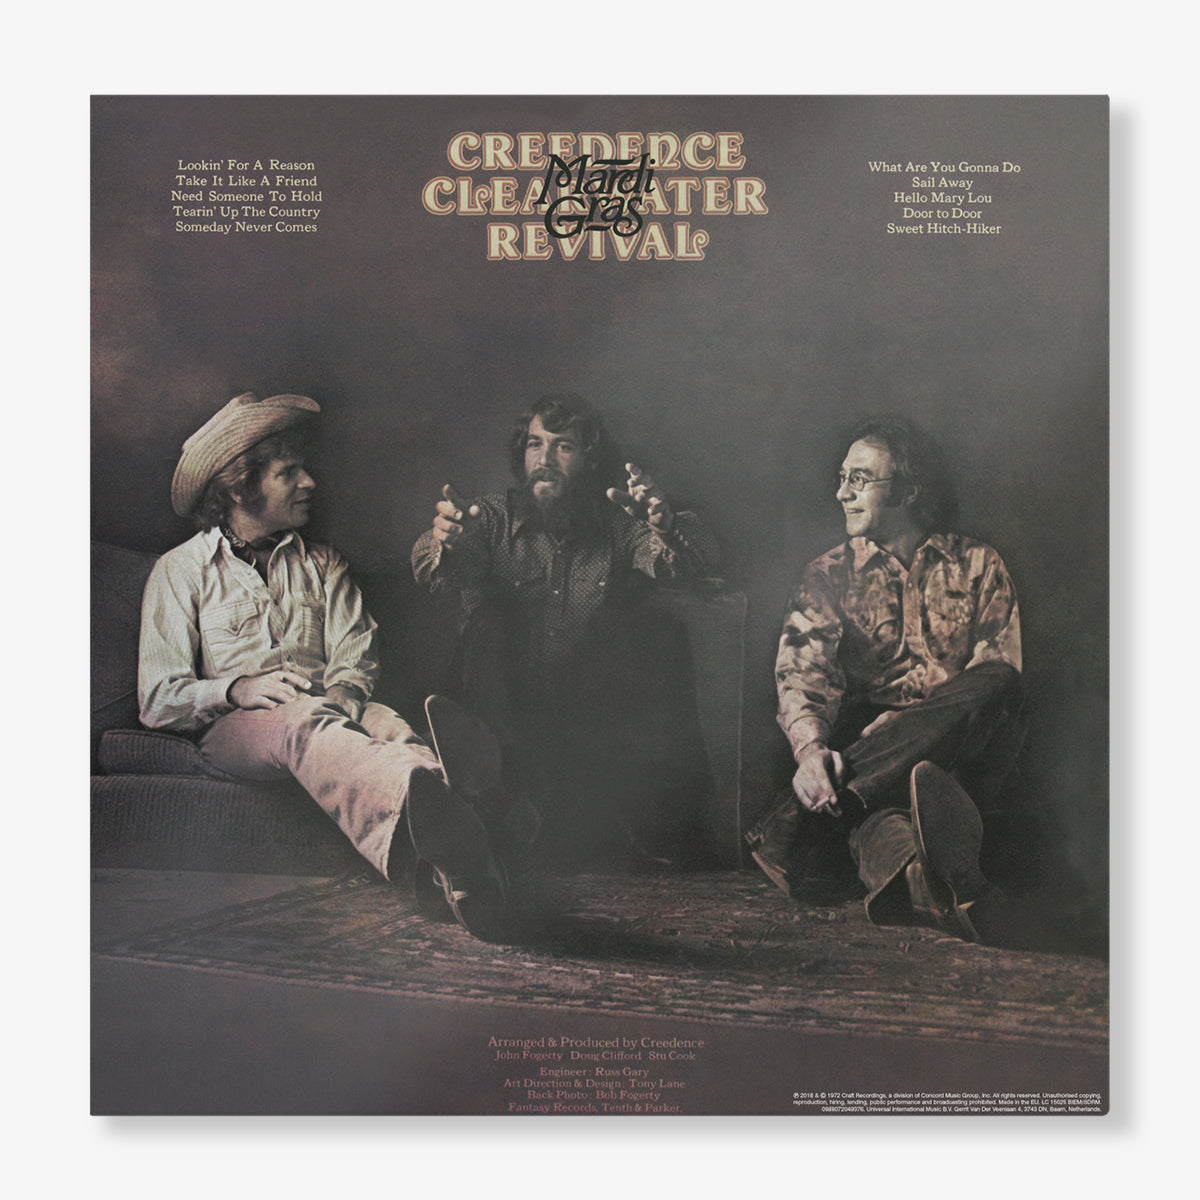 Creedence Clearwater Revival – Gras (Half-Speed Master LP) – Craft